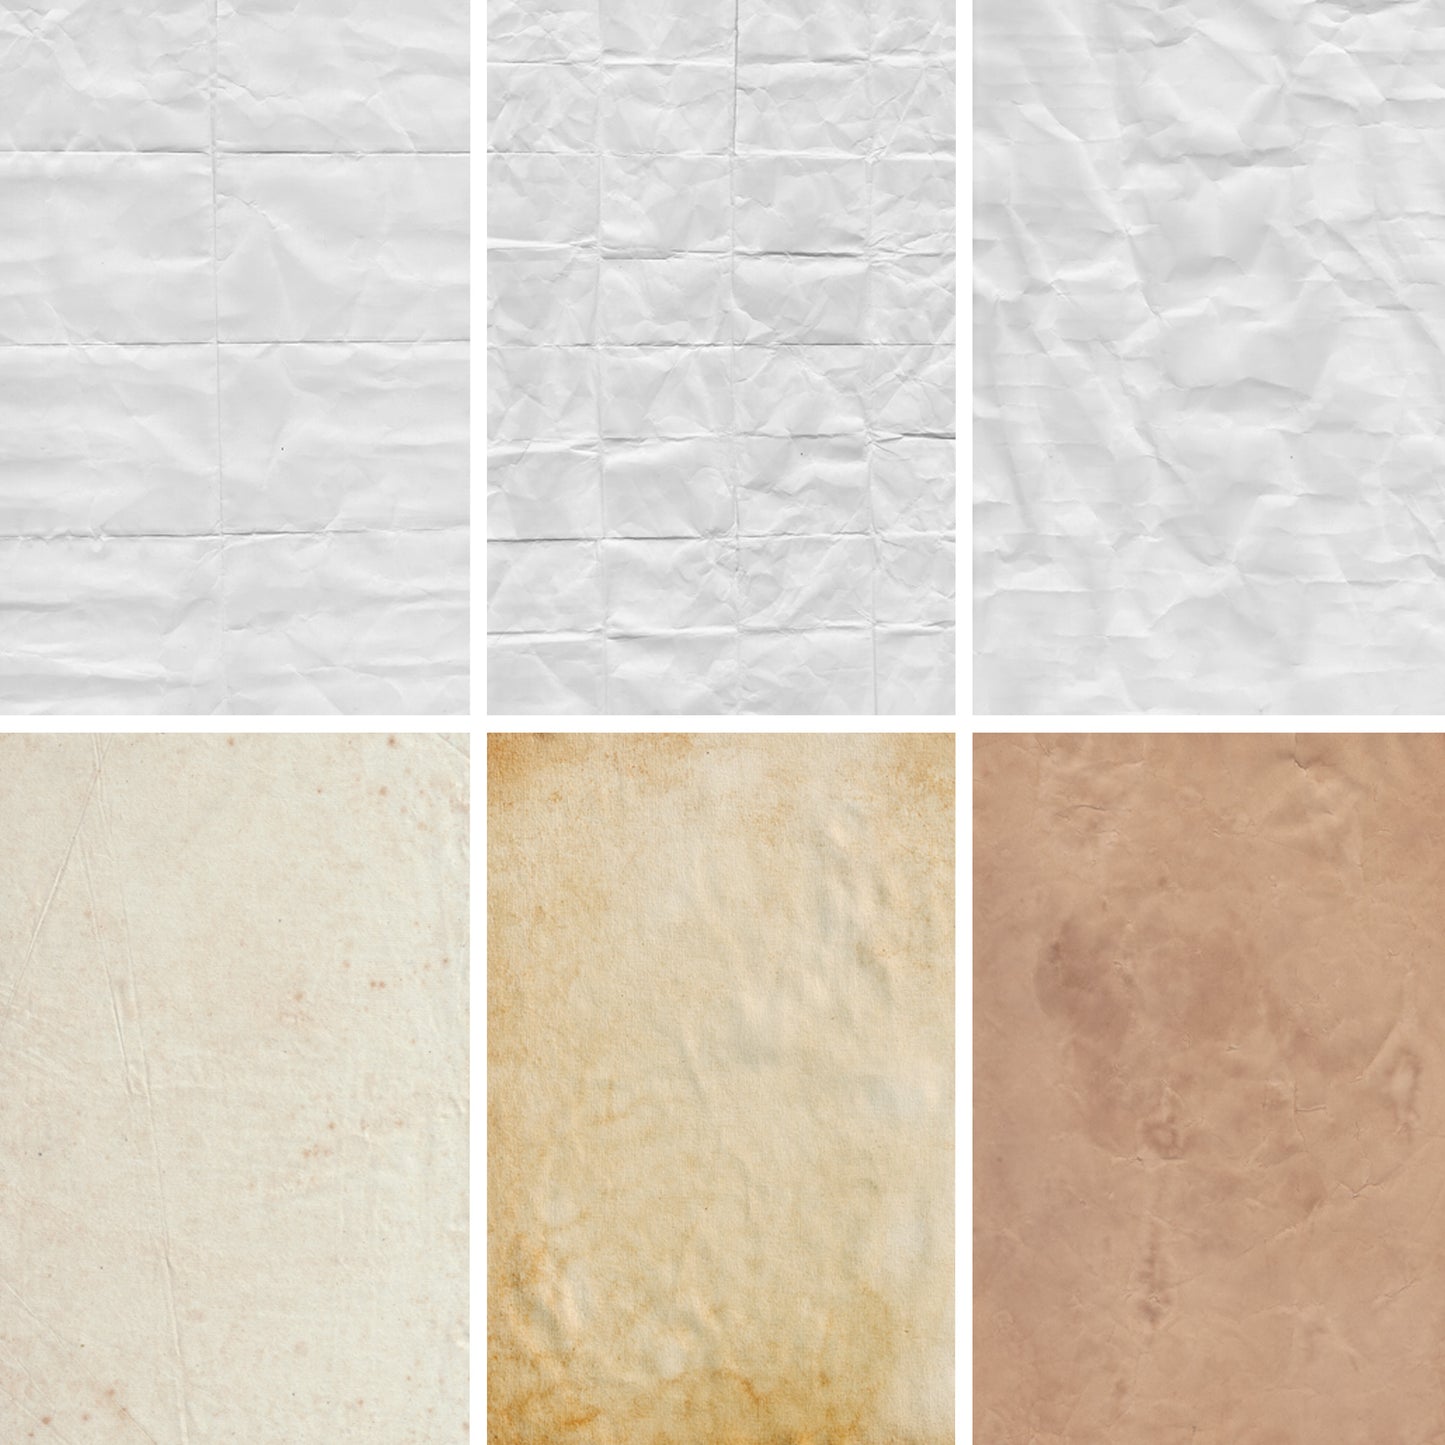 sample of crumpled and ages paper textures